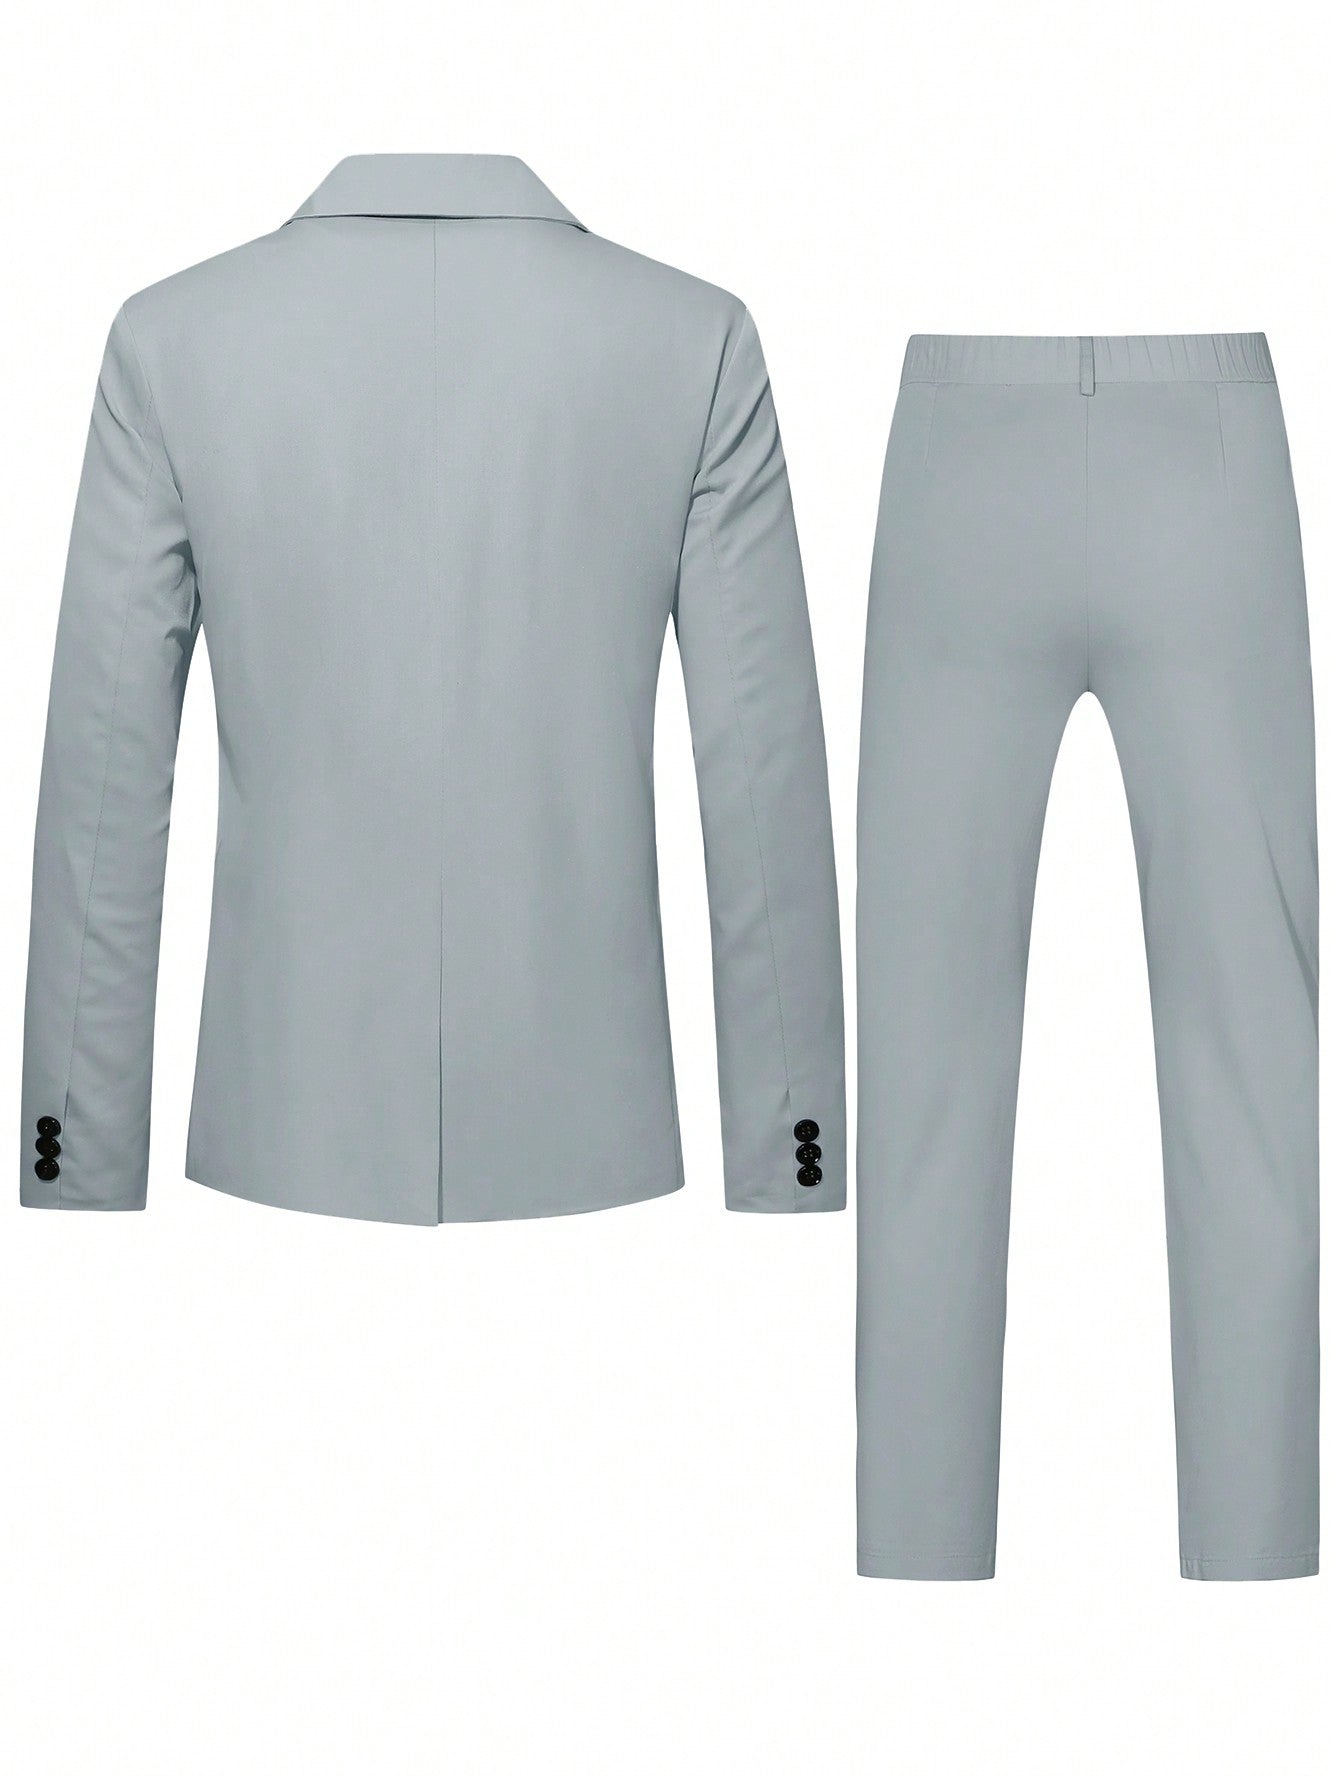 Manfinity Mode Men's Single Breasted Business Suit